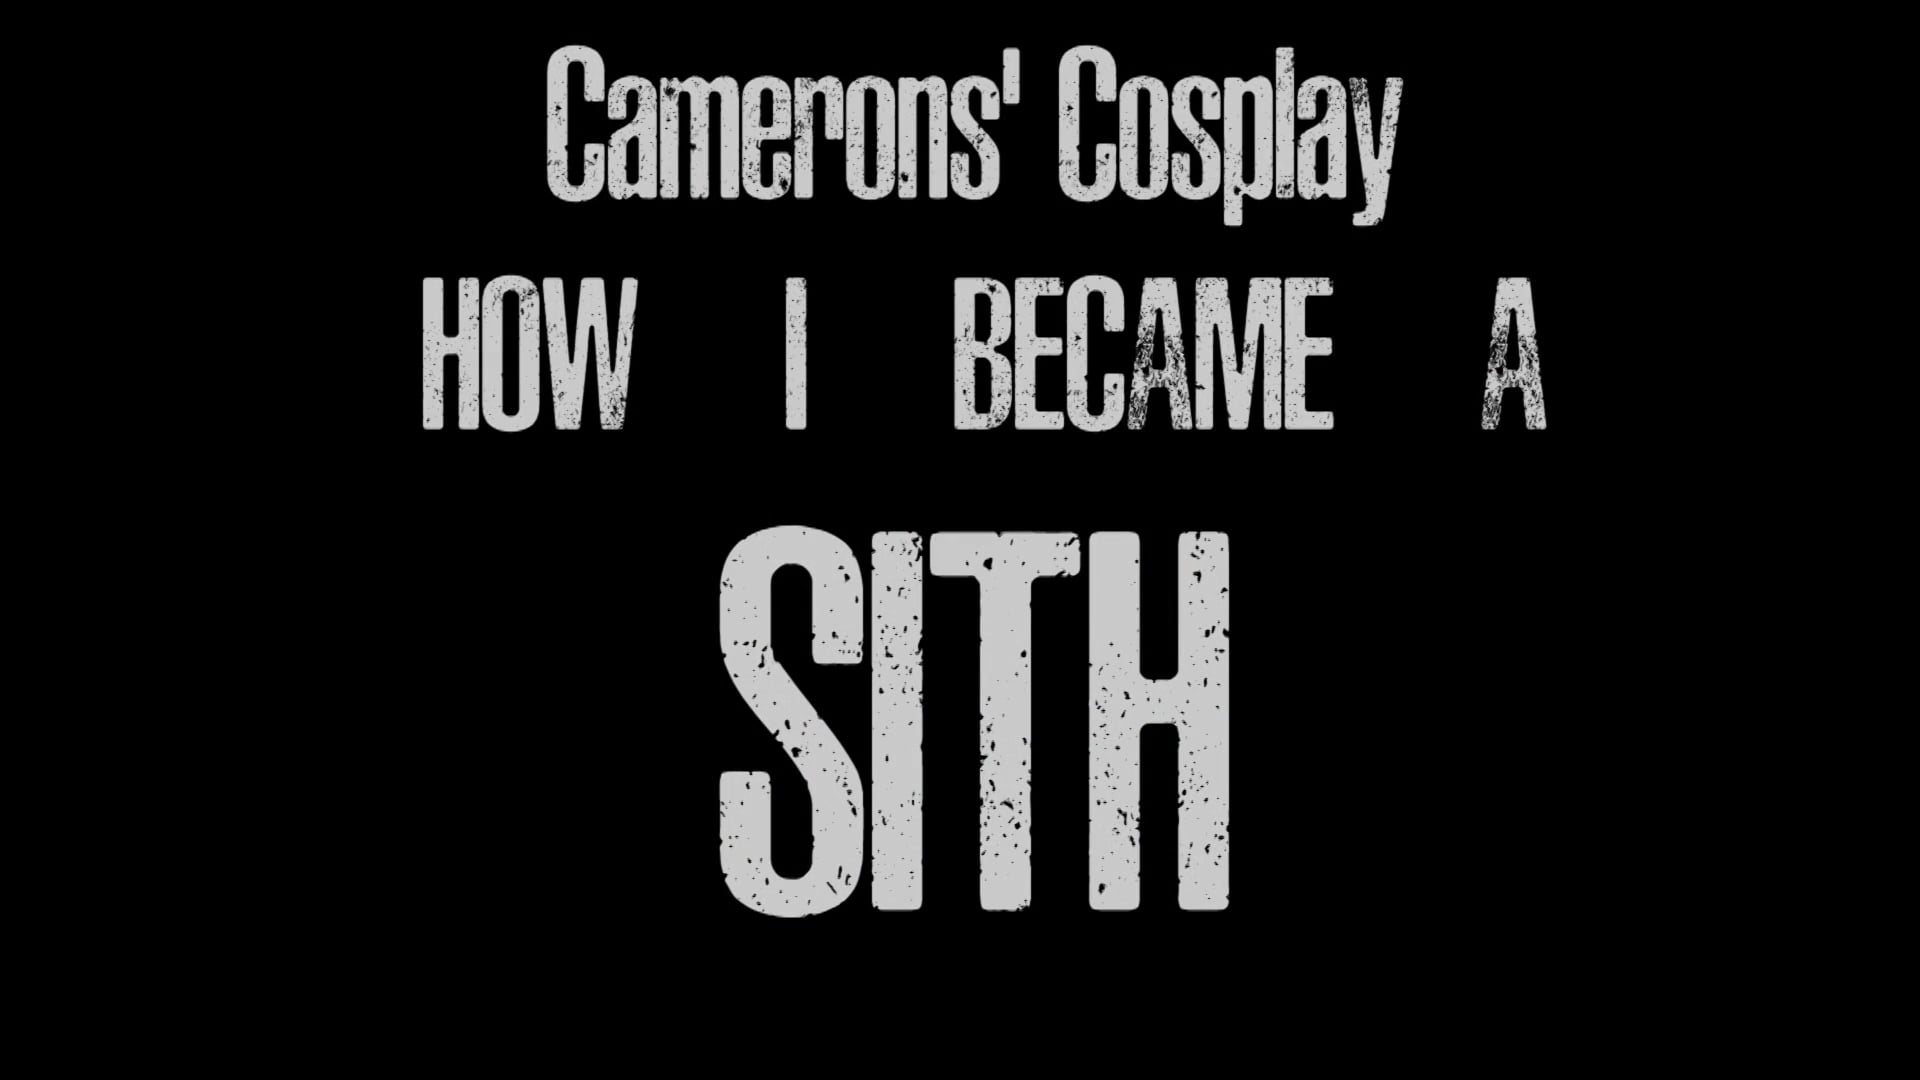 How I Became A Sith - Camerons' Cosplay Story